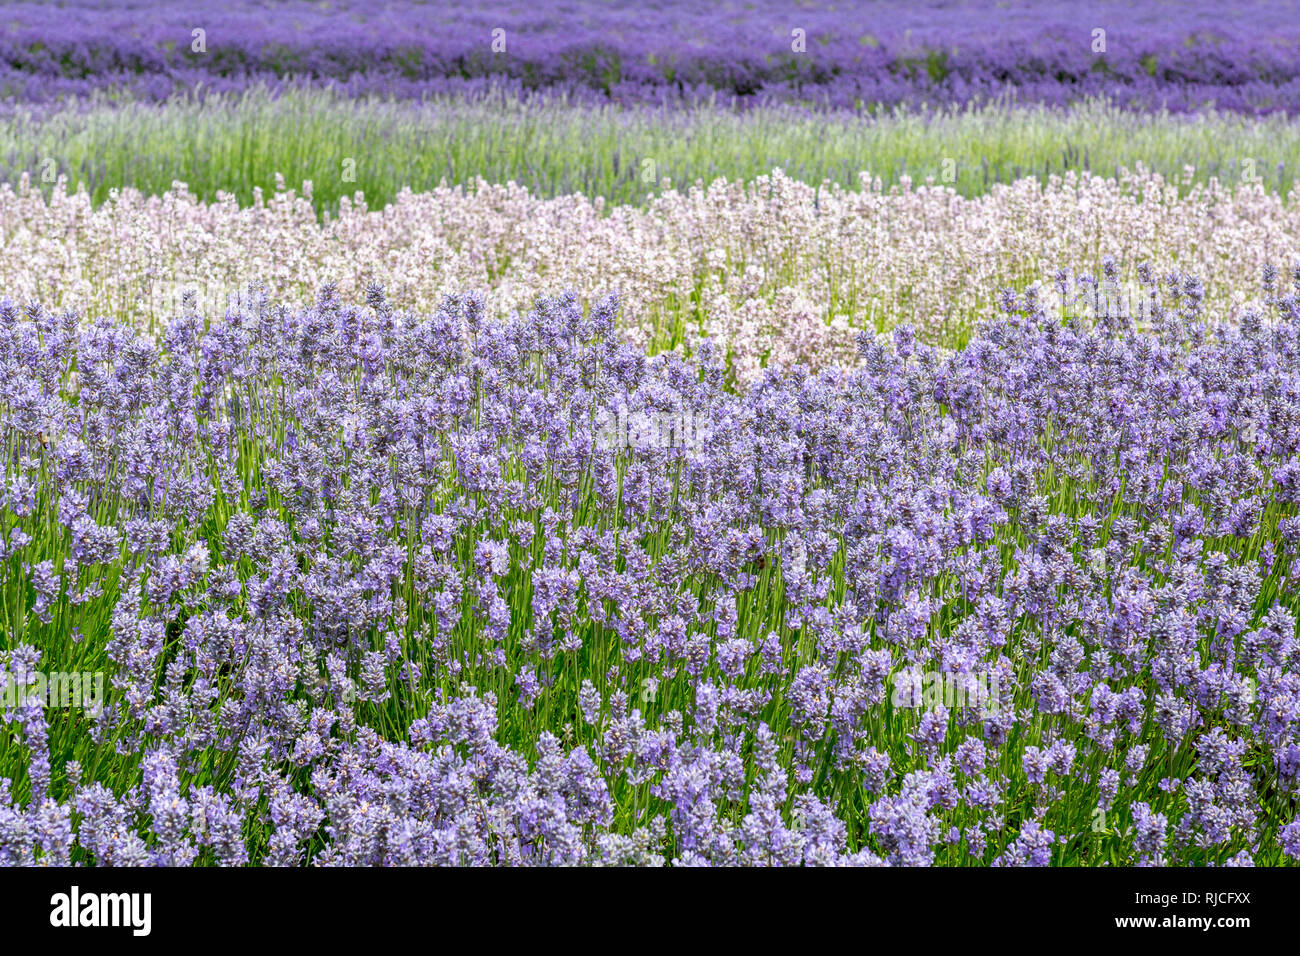 Close up of lavender field with rows of white, lilac and purple flowers Stock Photo